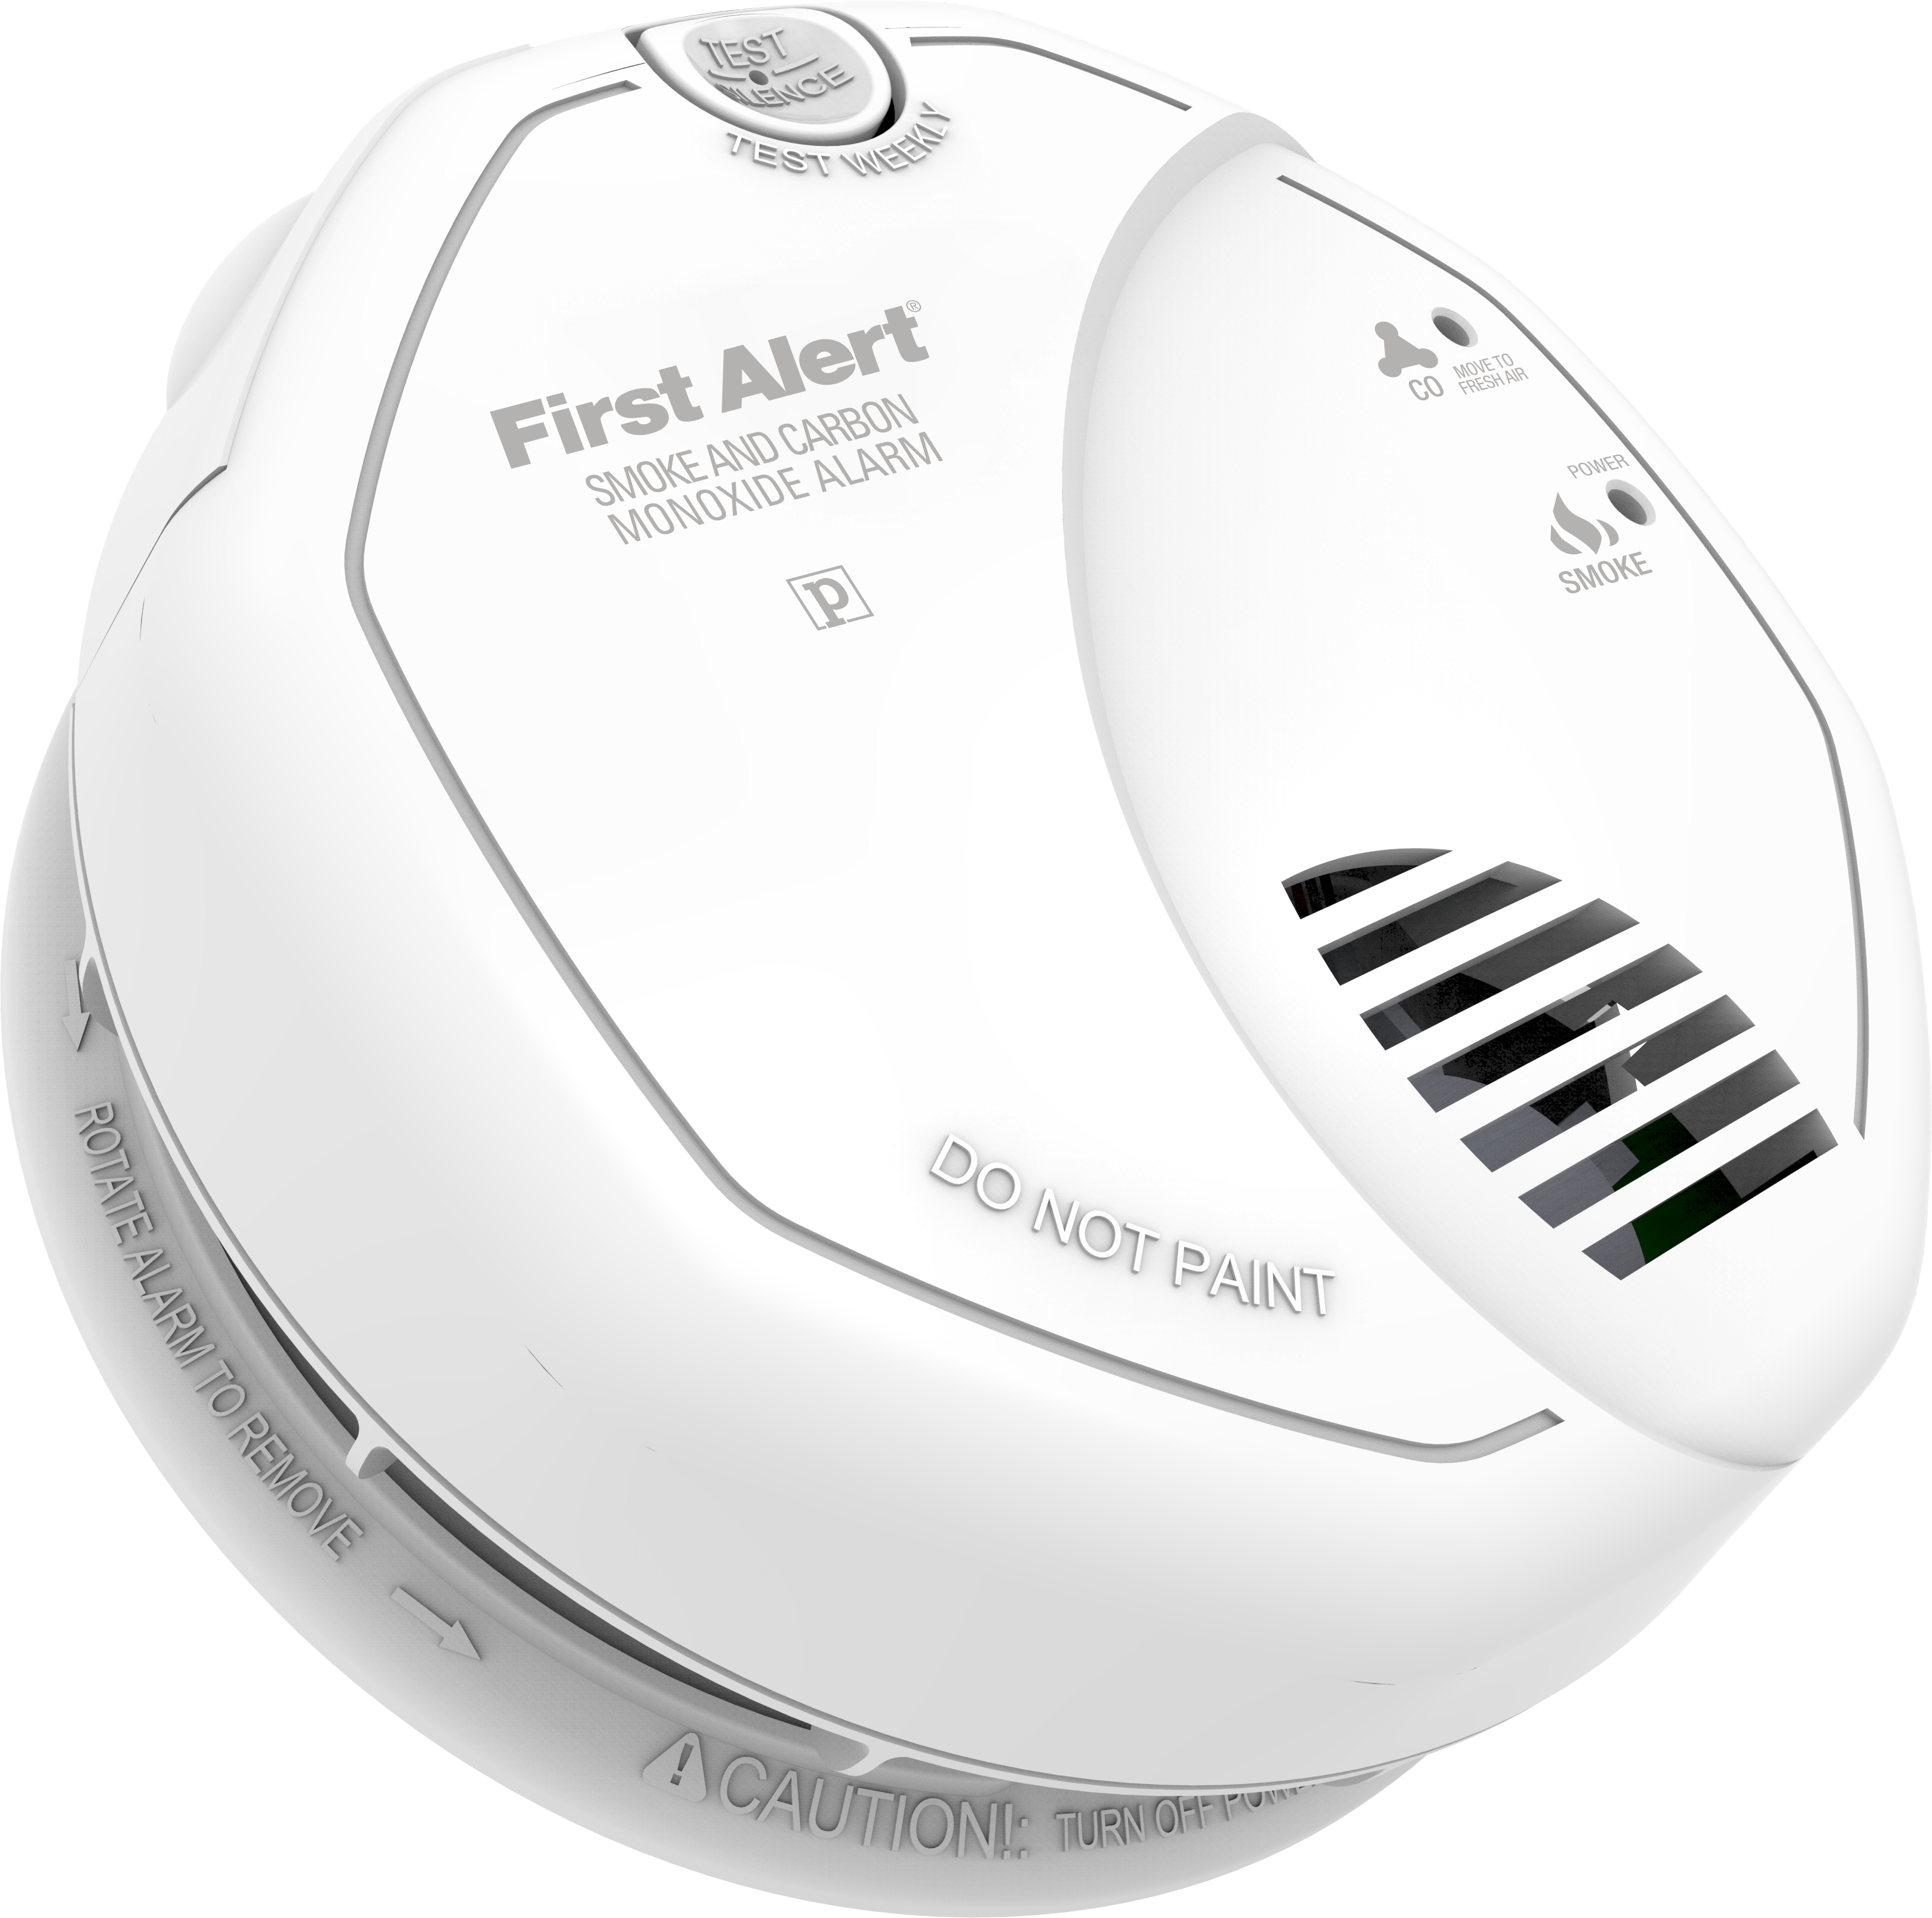 Hardwired photoelectric/CO combination alarm with voice meets new construction requirements for the state of Massachusetts and other states/counties that have similar requirements.